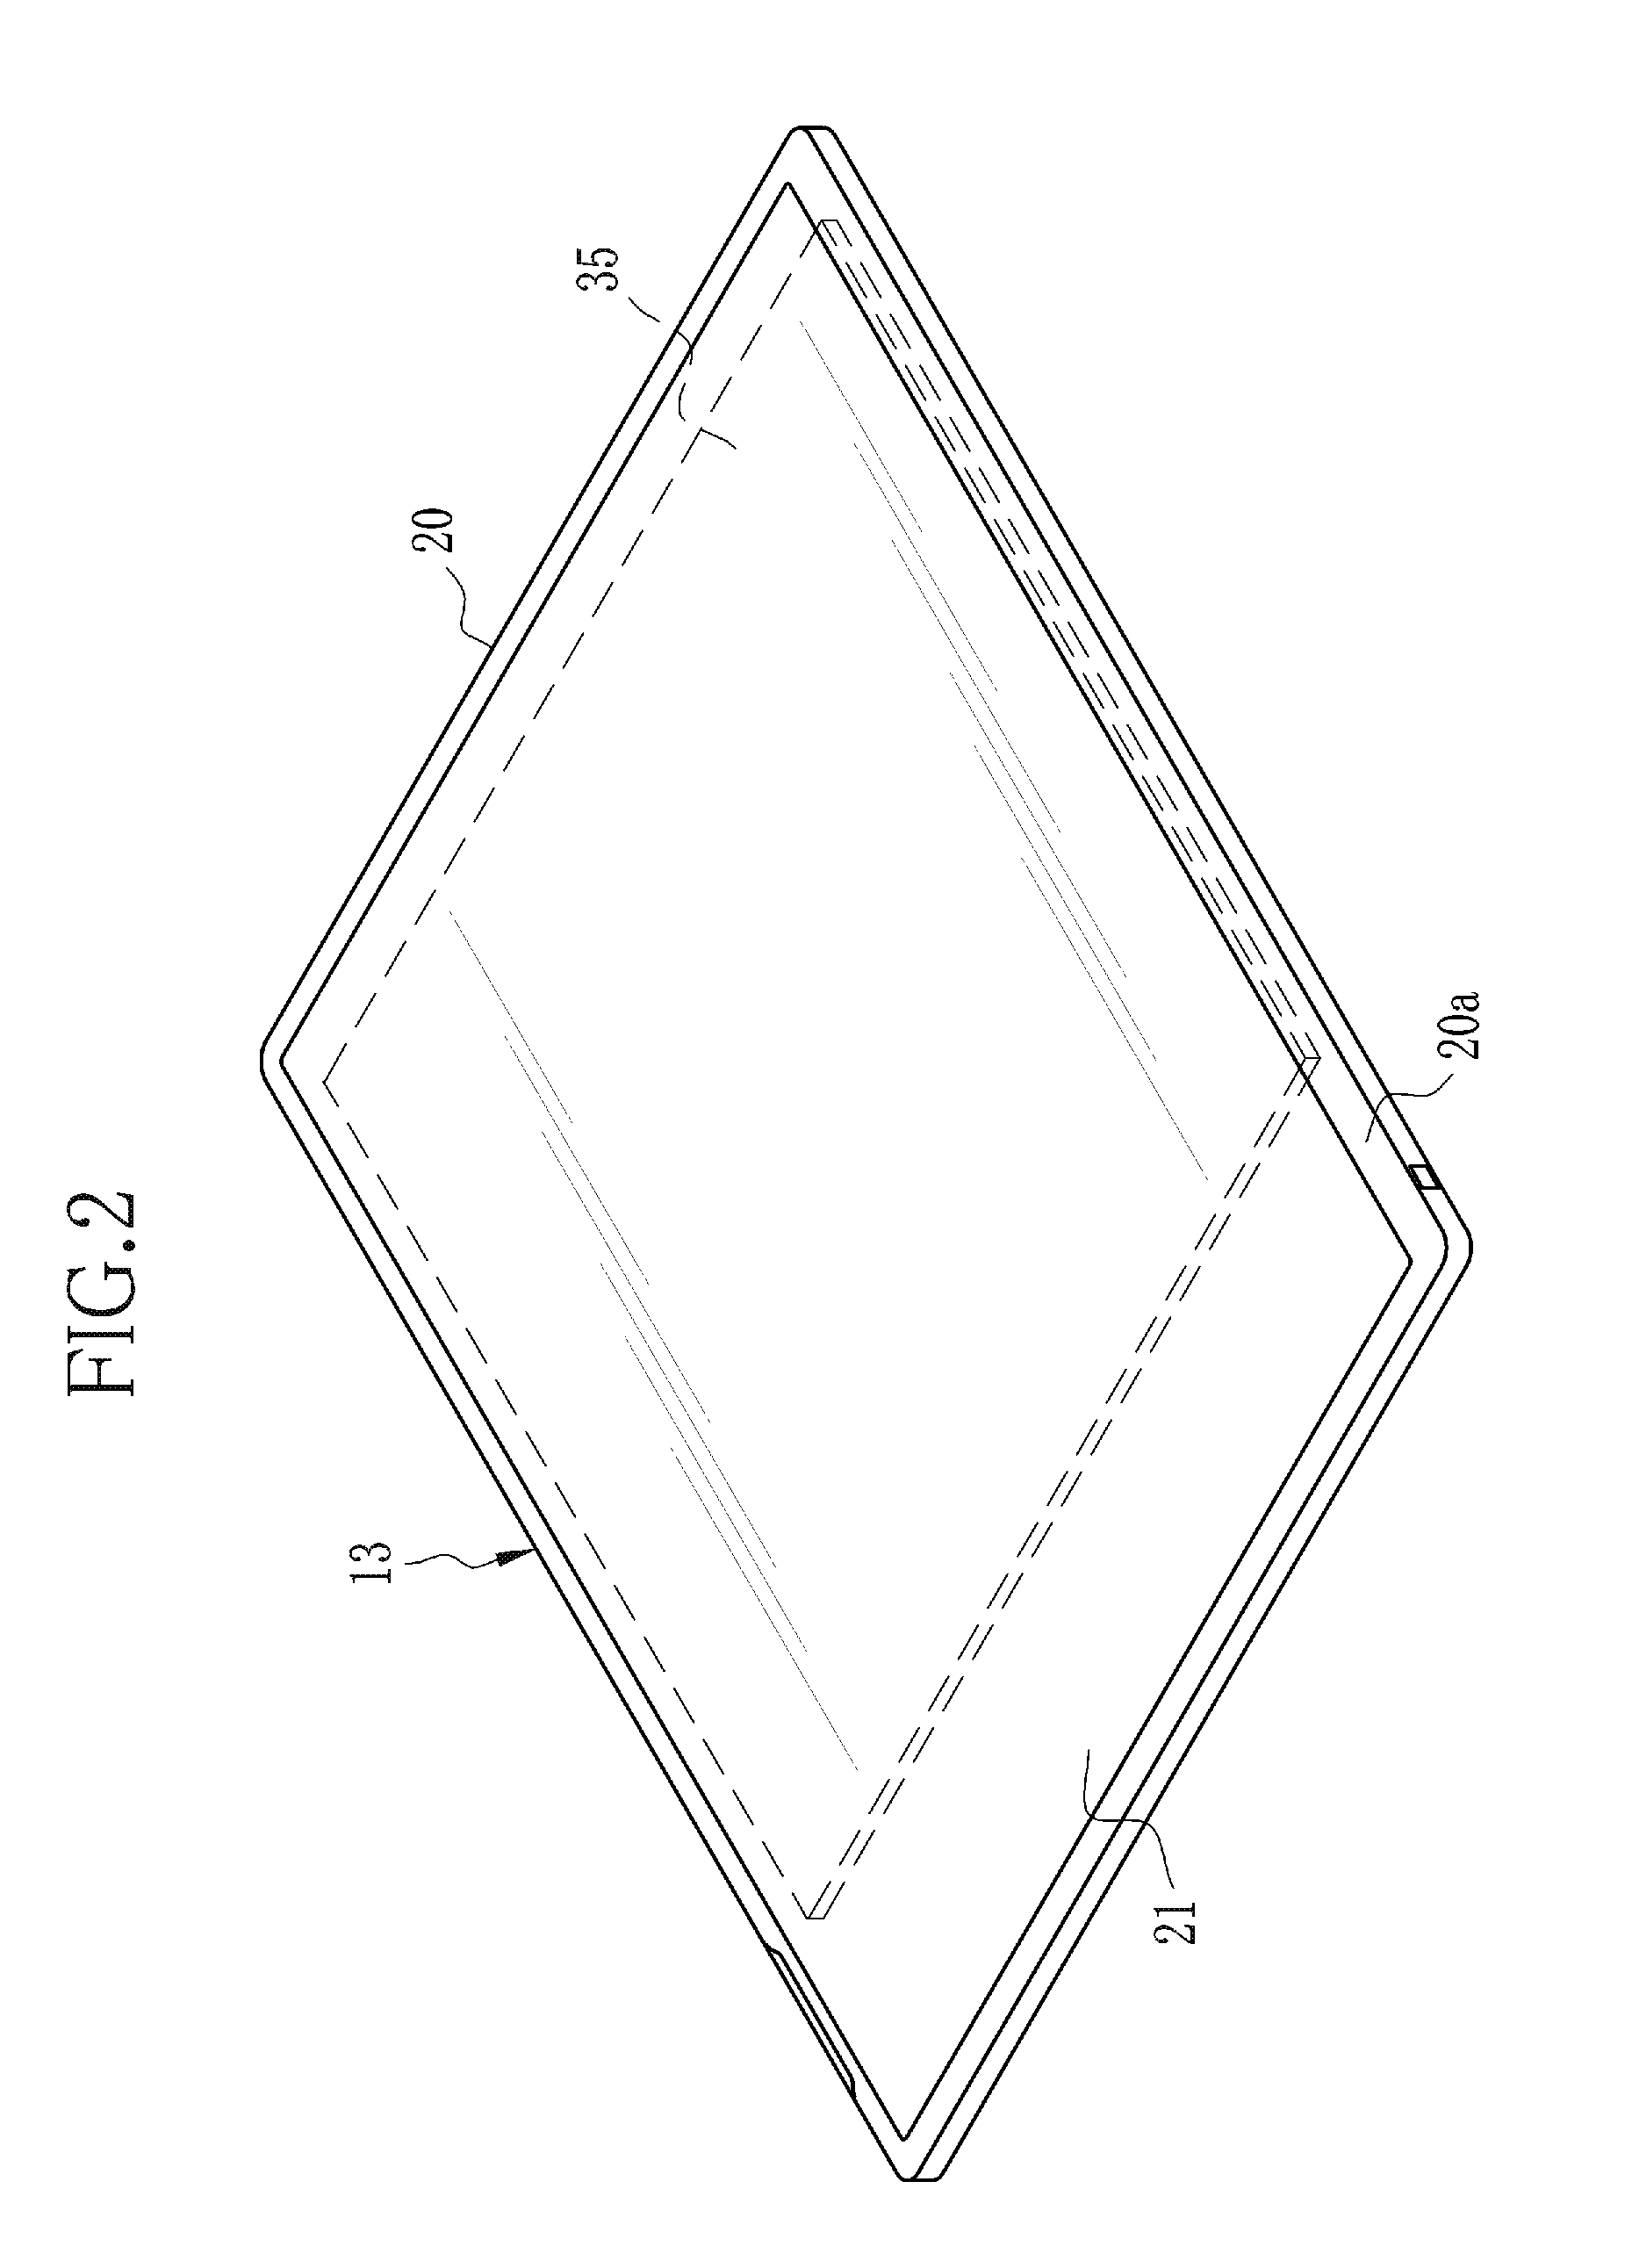 Radiographic image detector and controlling method therefor